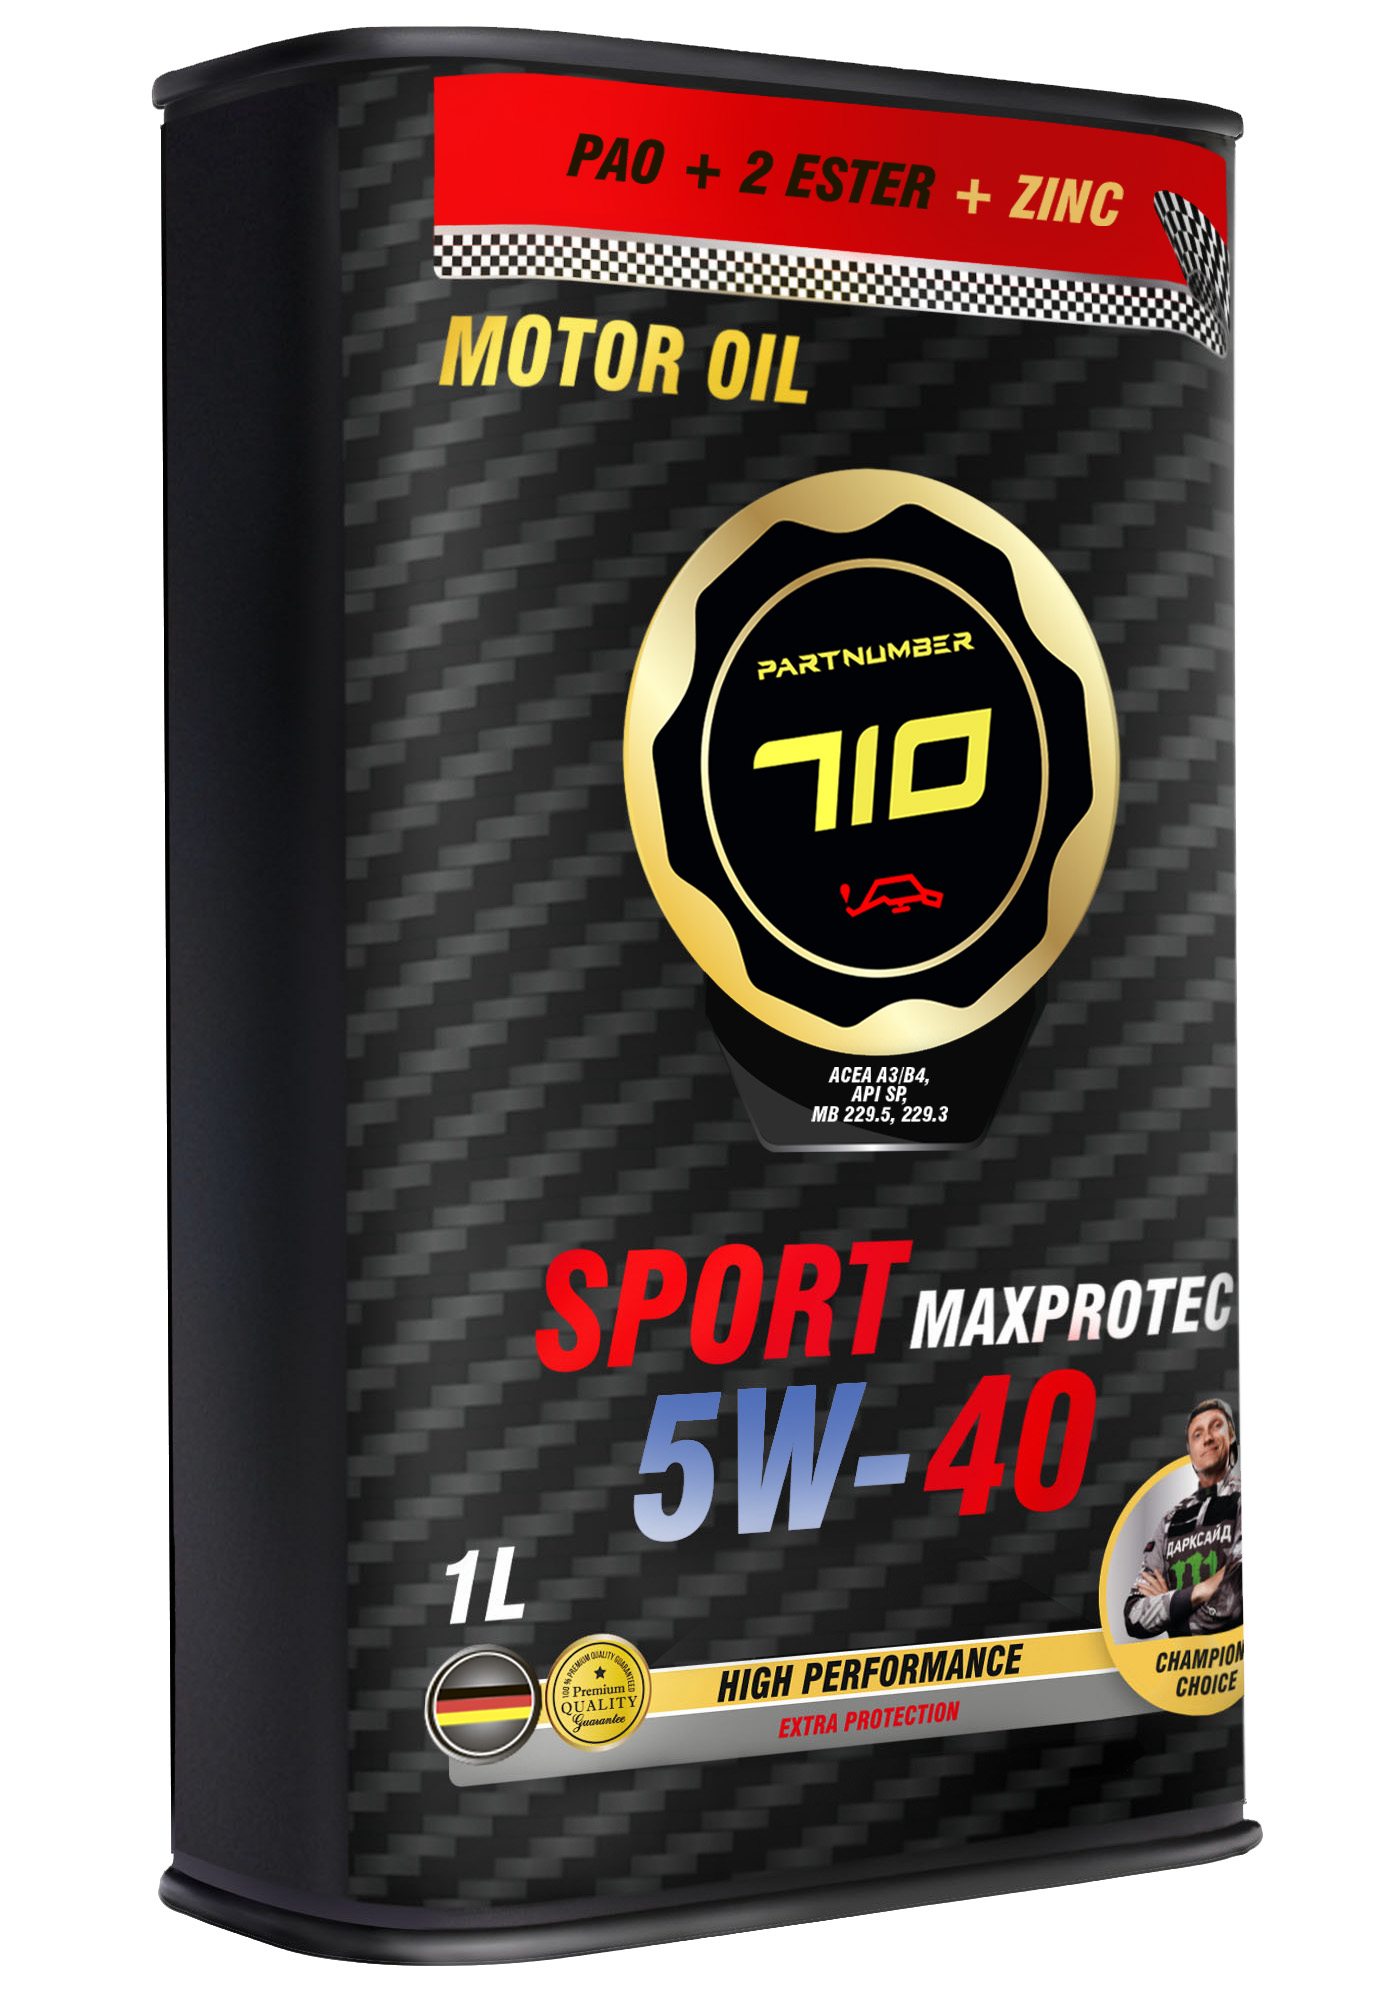 картинка Масло моторное PARTNUMBER 710 Sport MaxProtec 5W-40 1л